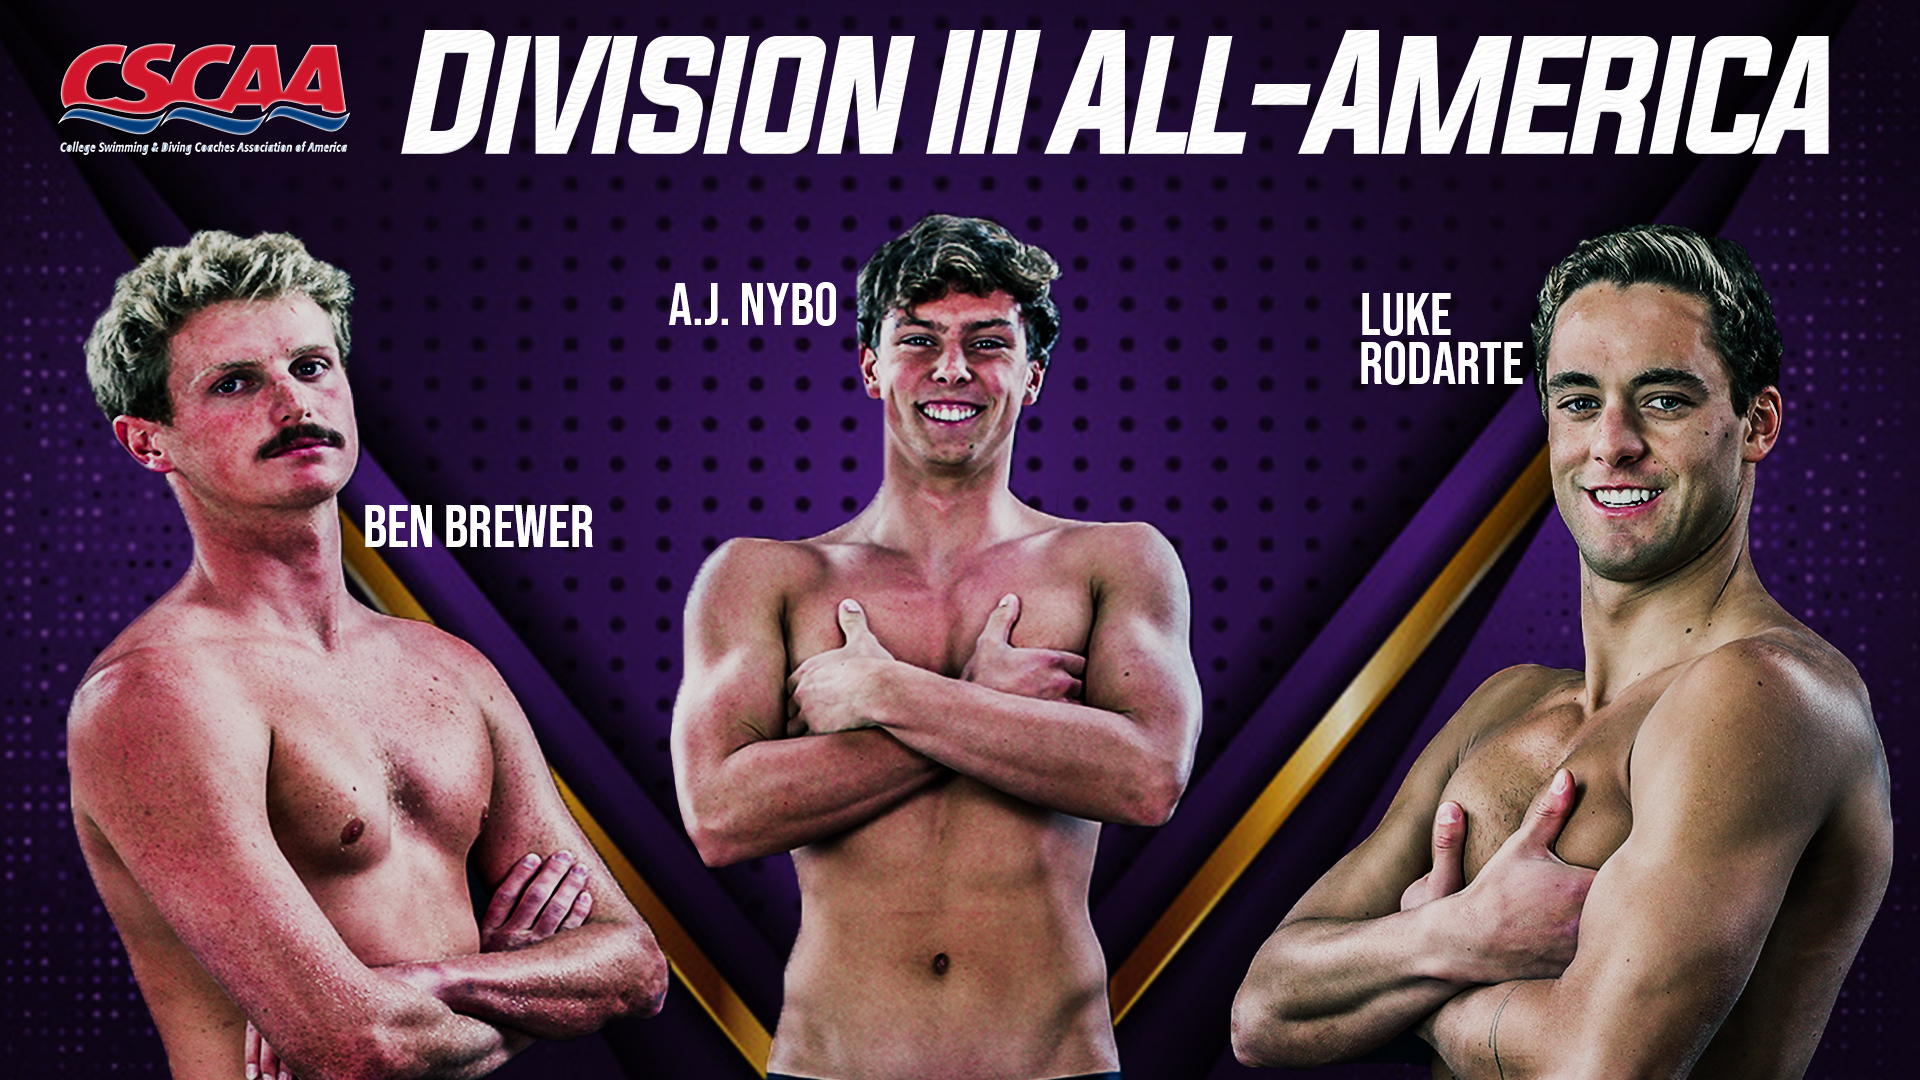 Brewer, Nybo, Rodarte Named to Division III All-America Team by CSCAA